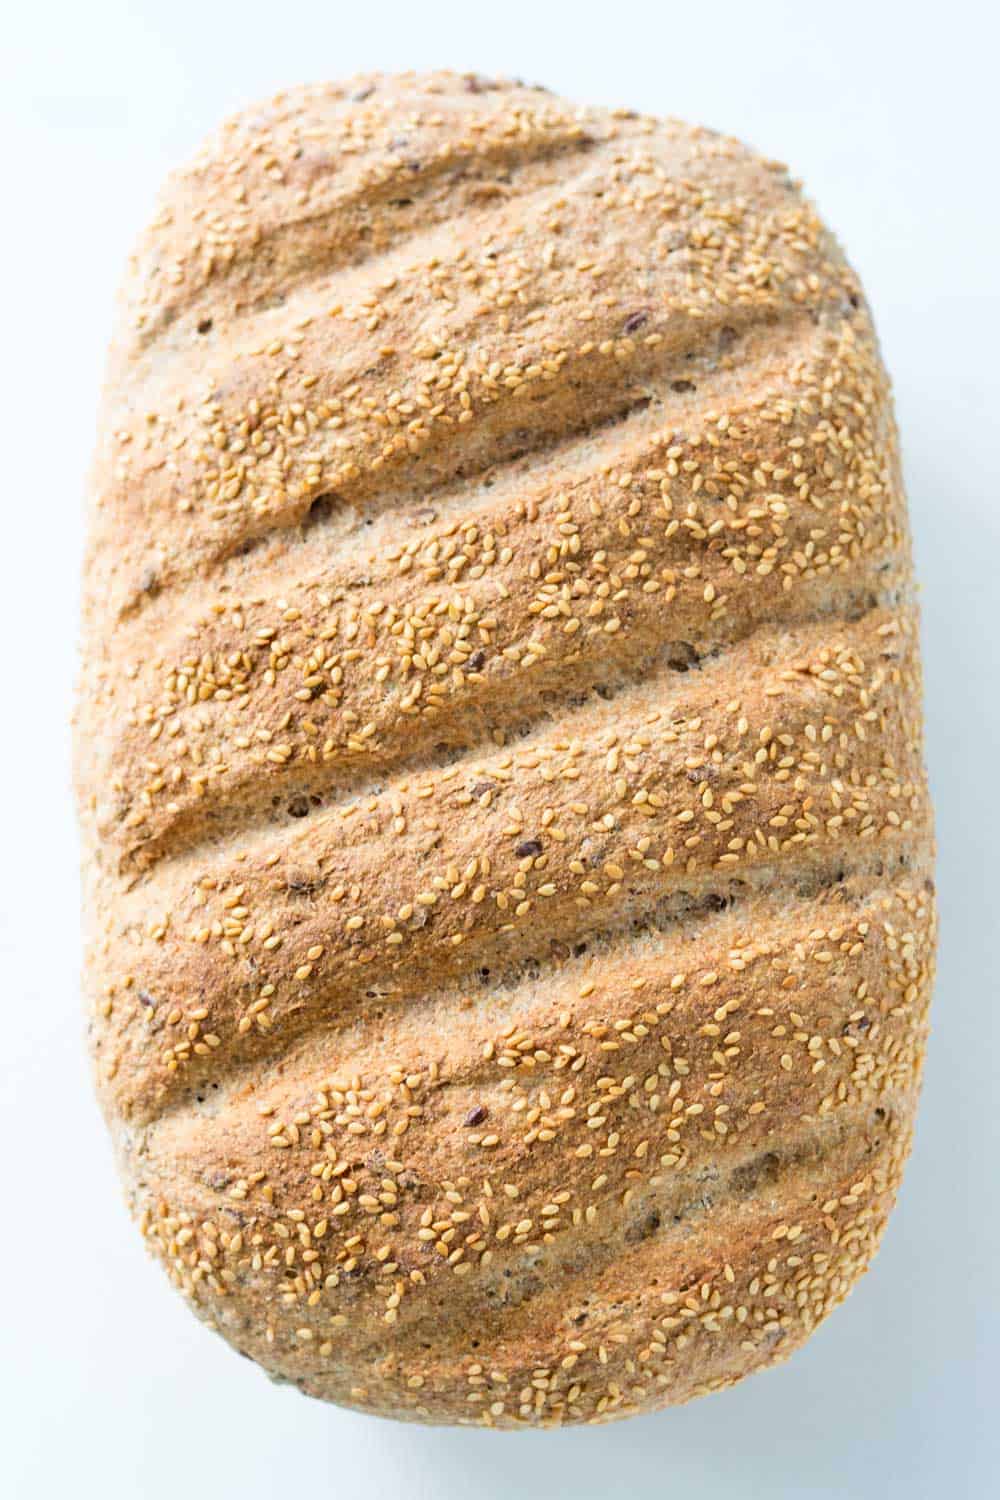 This nutritious Whole Grain Spelt Bread Recipe with flax and sesame seeds is super easy to make. You ca bake the dough in a loaf pan or Dutch oven.